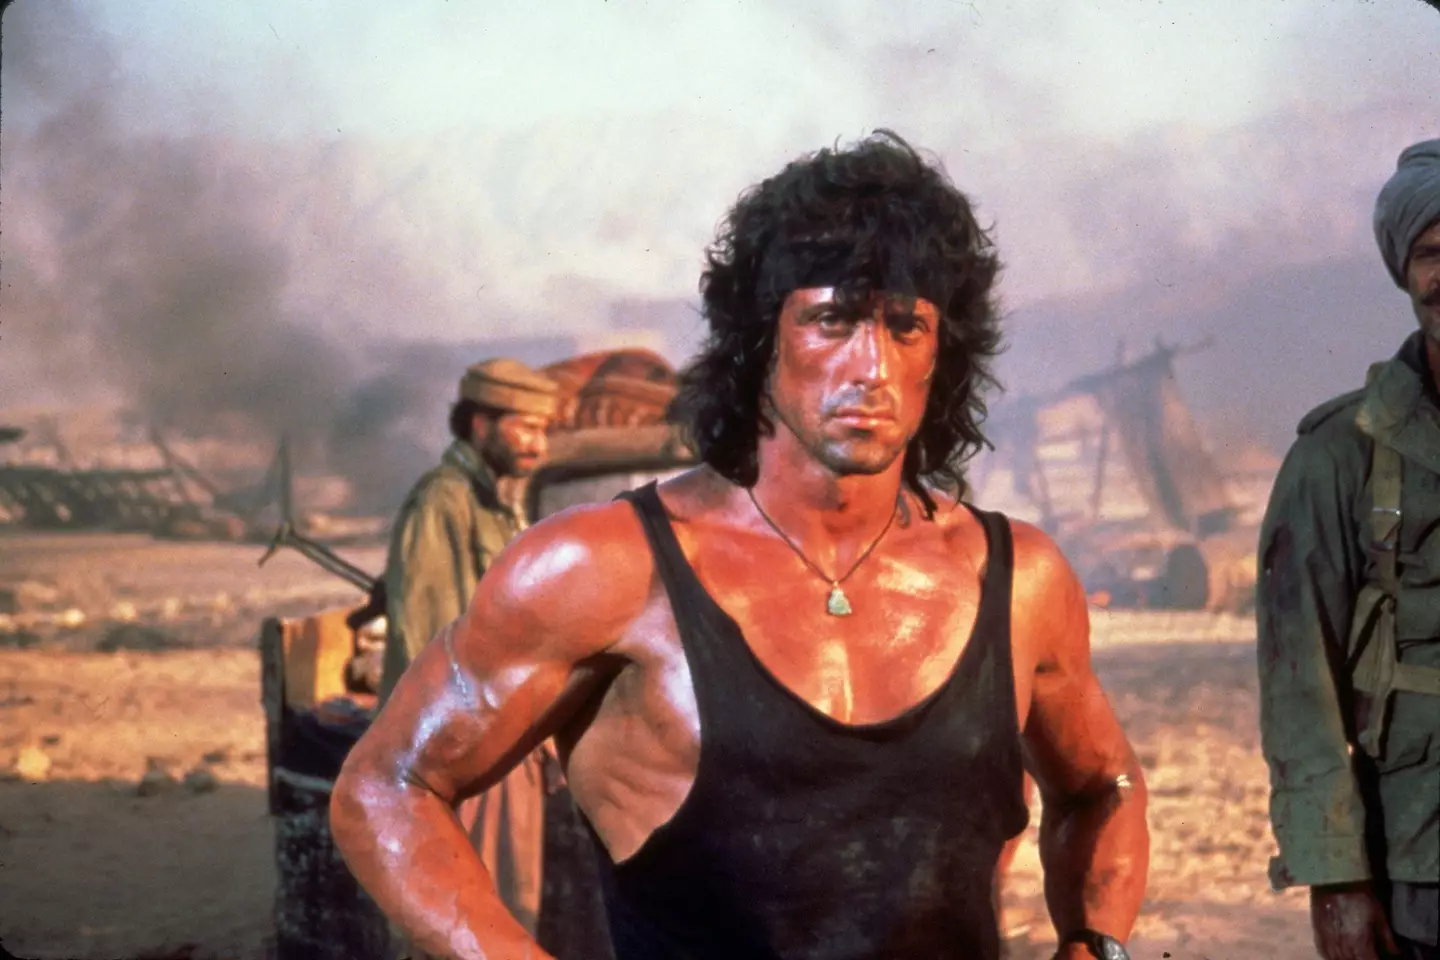 Stallone turned down a major offer to do another Rambo movie.